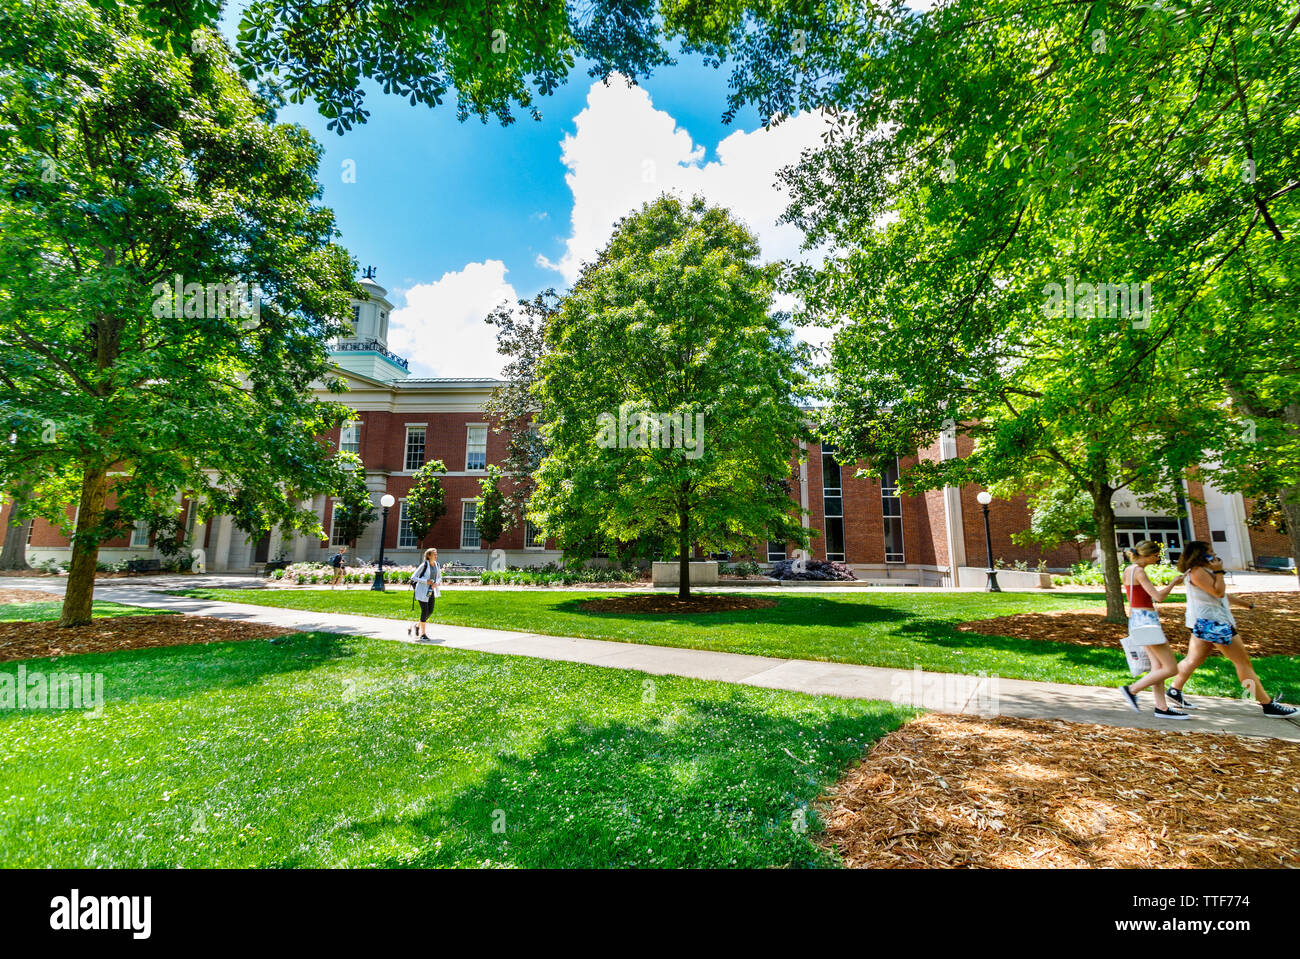 ATHENS, GA, USA - May 3: School of Law on May 3, 2019 at the University of Georgia, North Campus in Athens, Georgia. Stock Photo